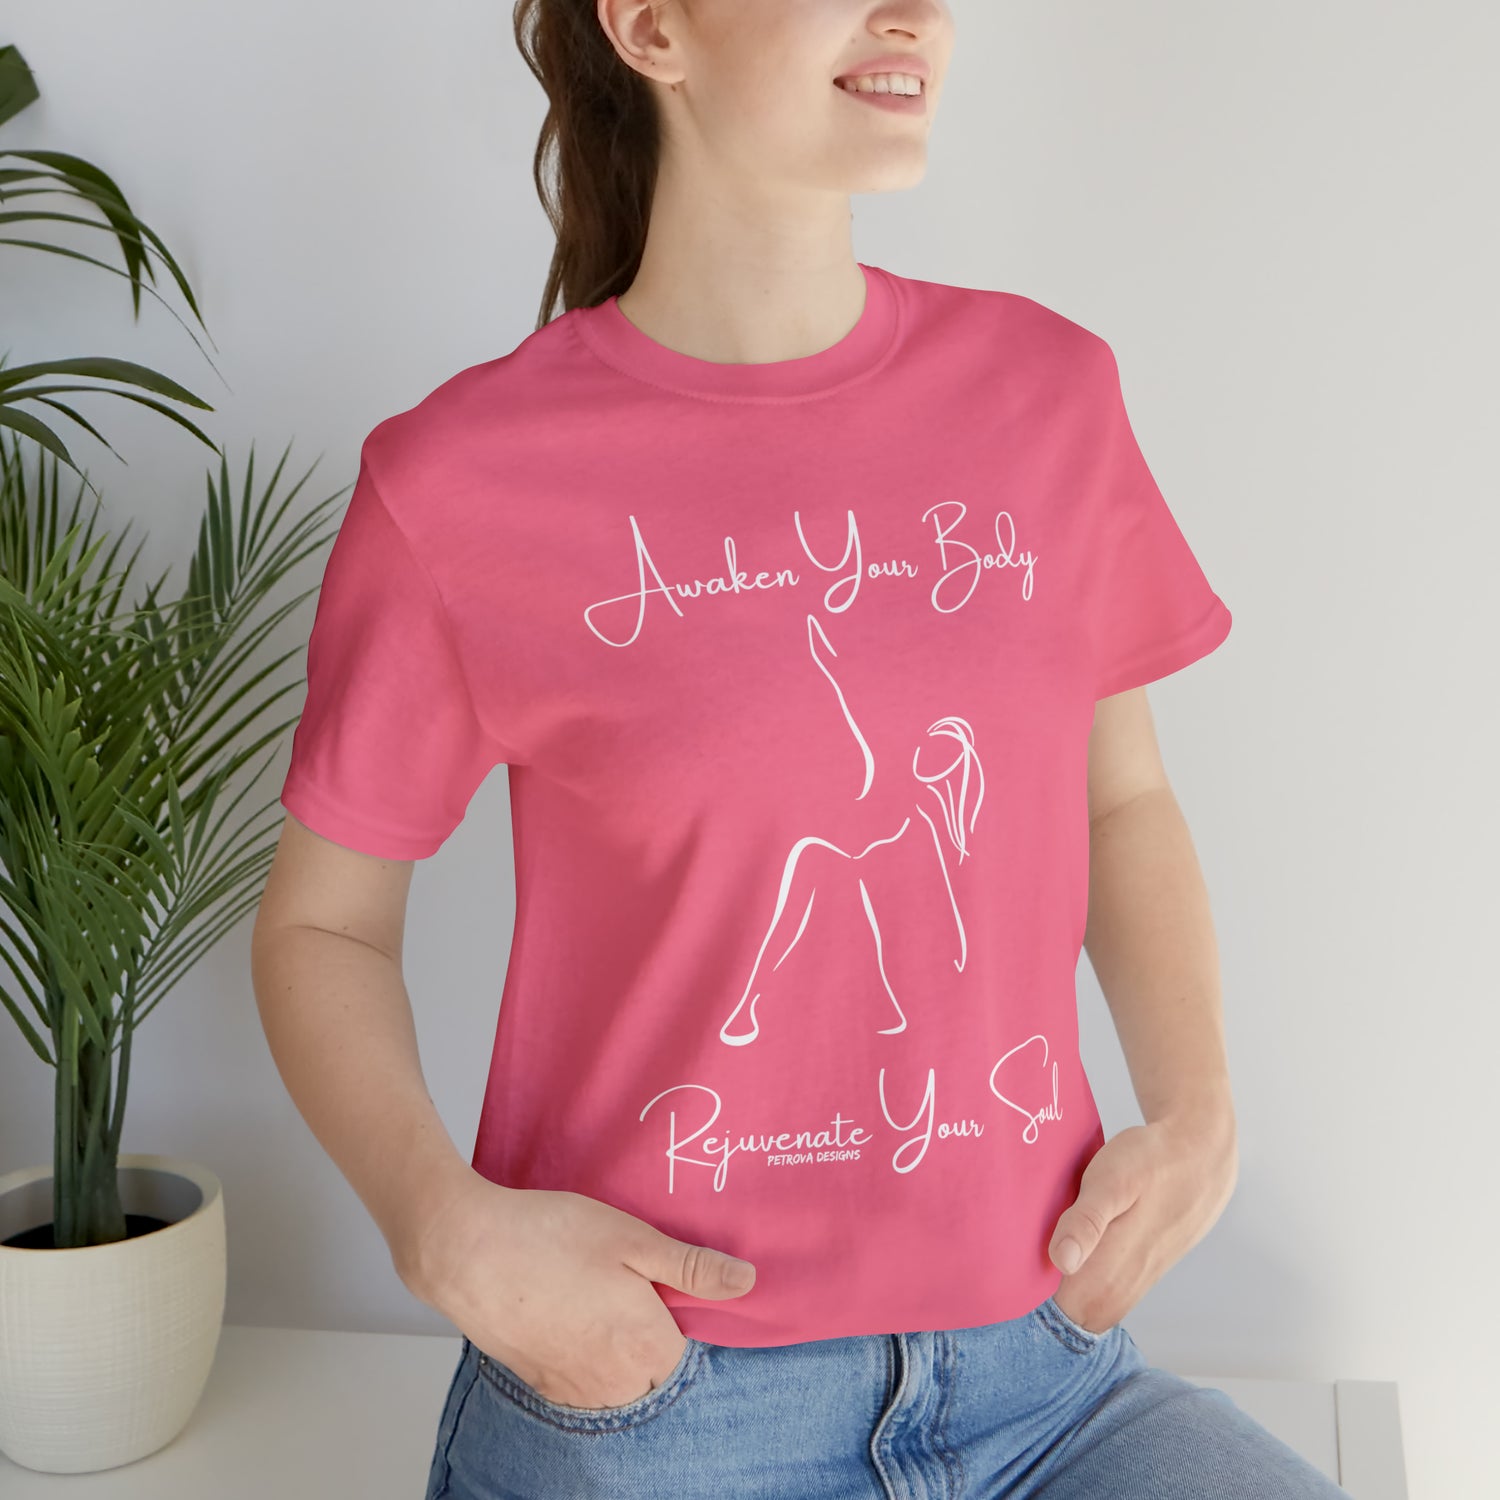 Charity Pink T-Shirt Tshirt Design Gift for Friend and Family Short Sleeved Shirt Yoga Petrova Designs